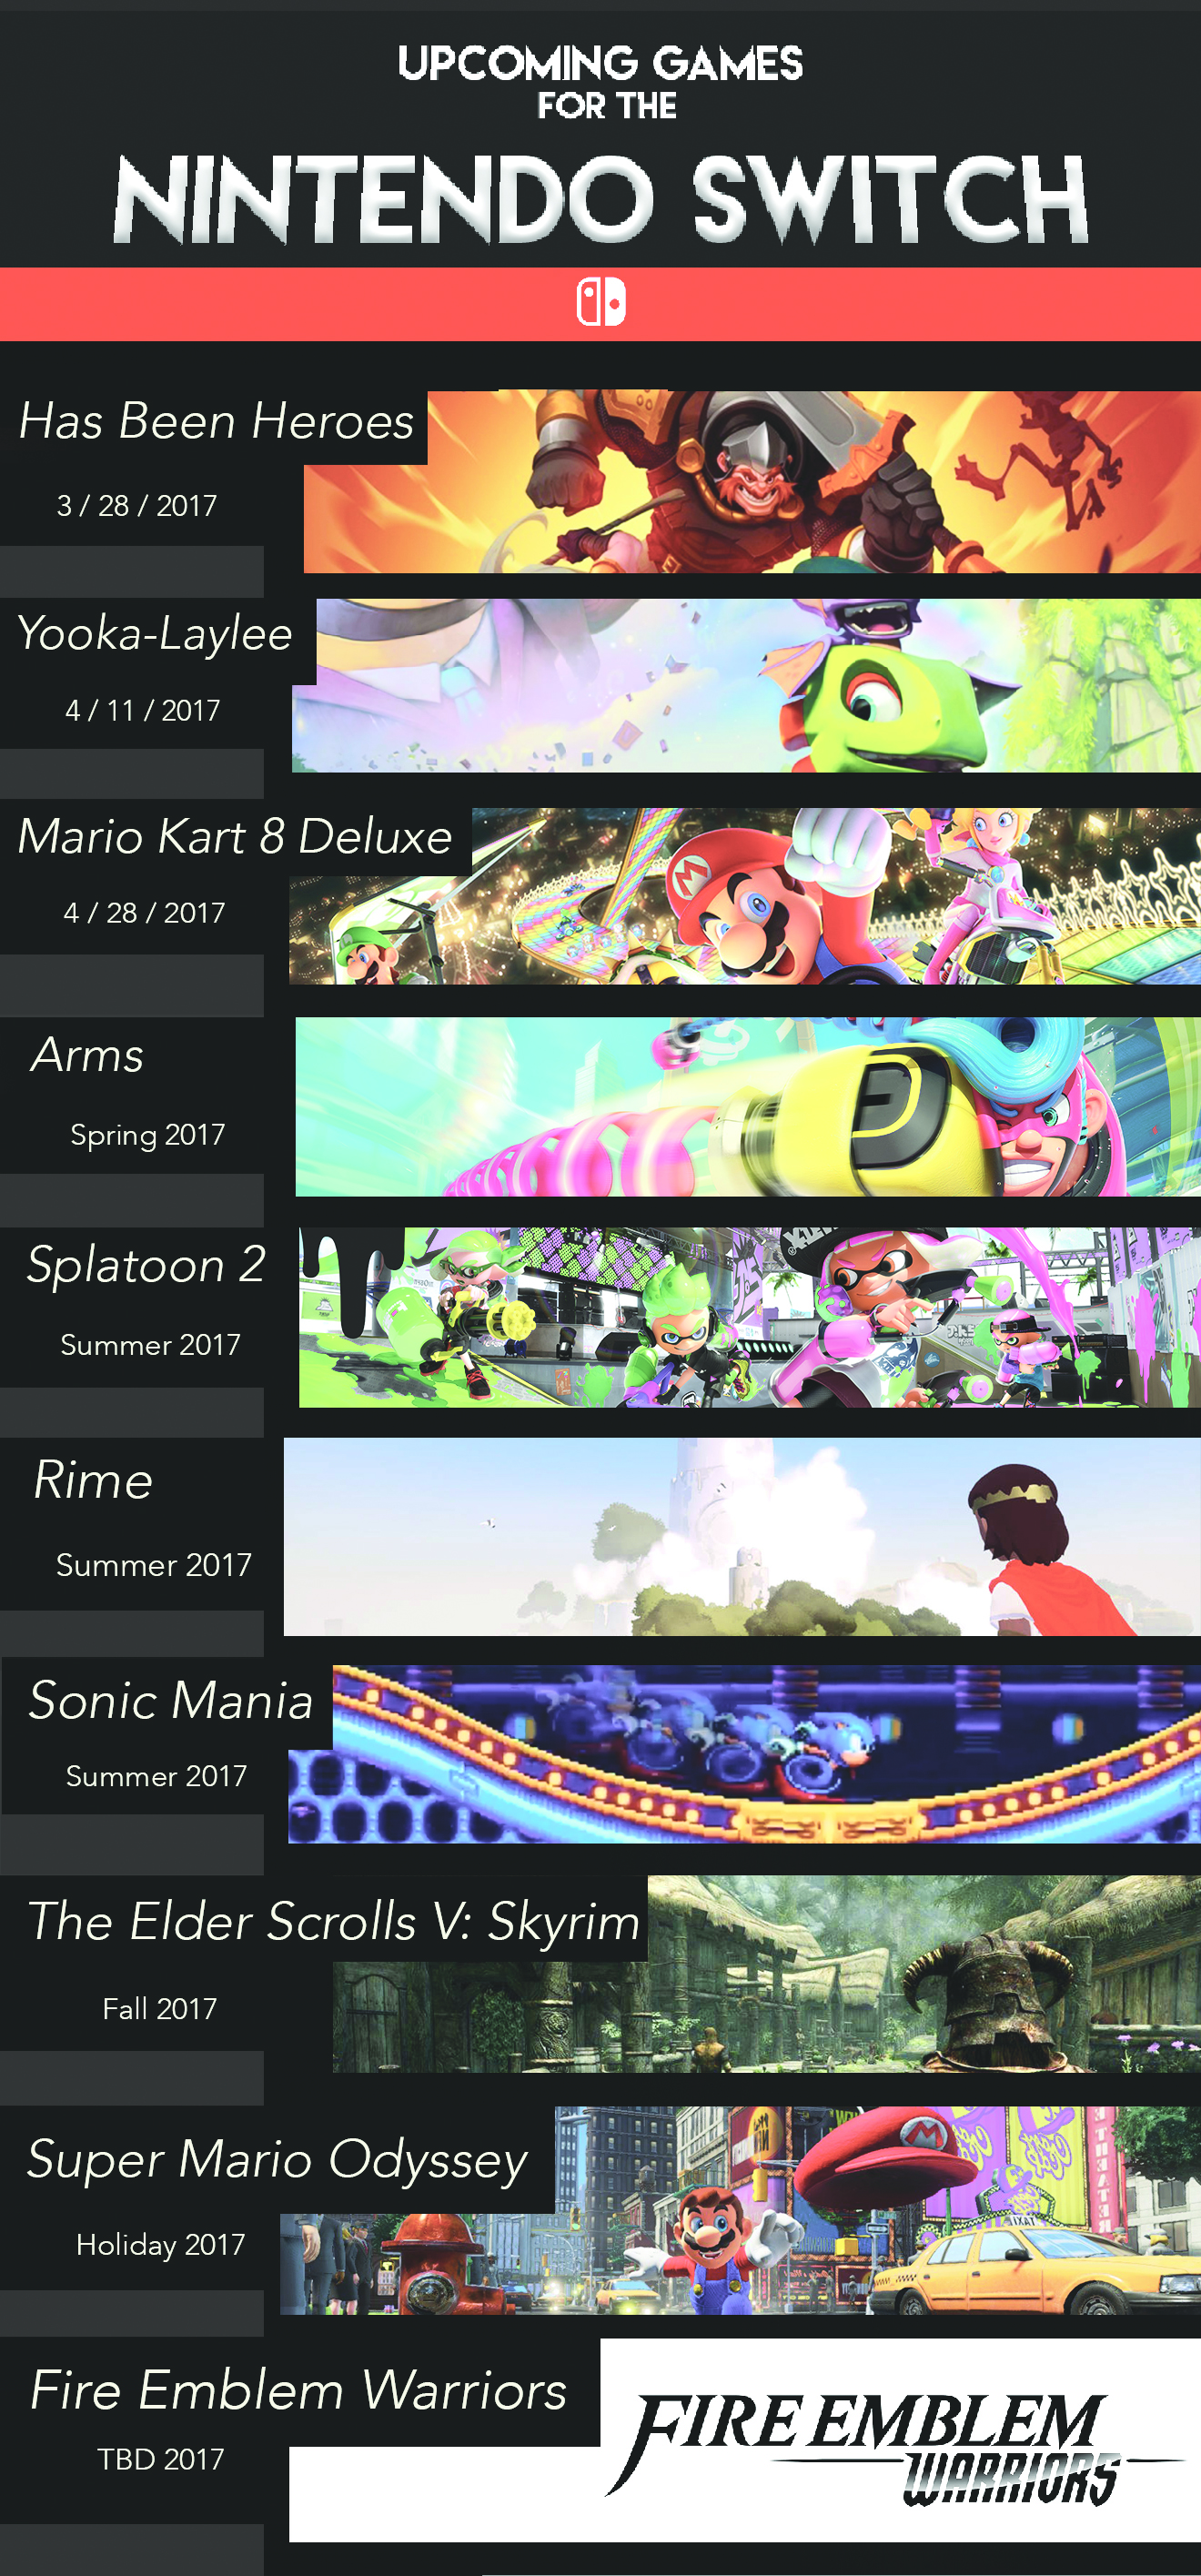 Upcoming games for the Nintendo Switch